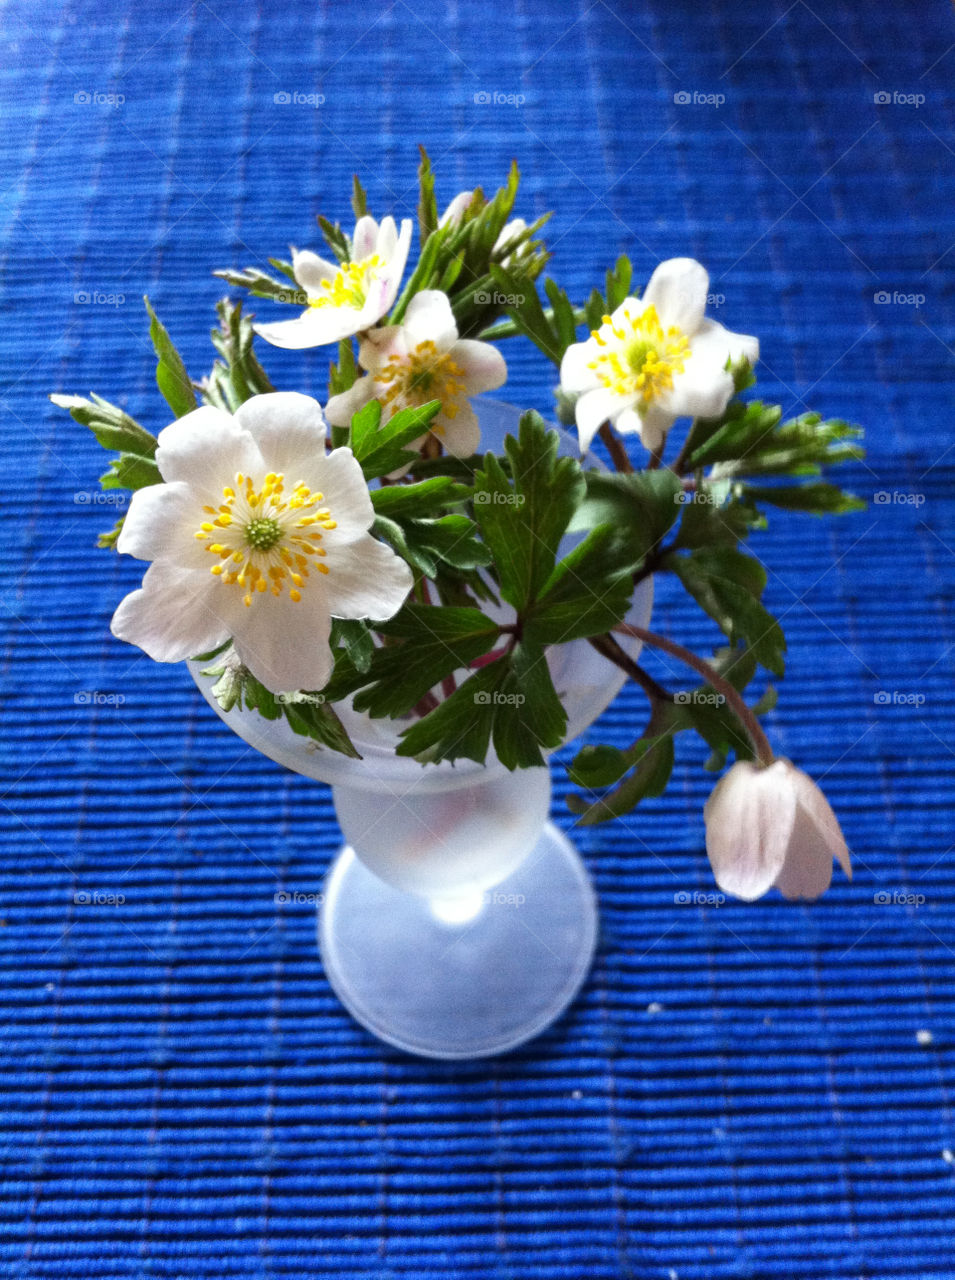 Bouquet of Wood anemones in a frosted white glass vase standing on a clear blue table cloth.